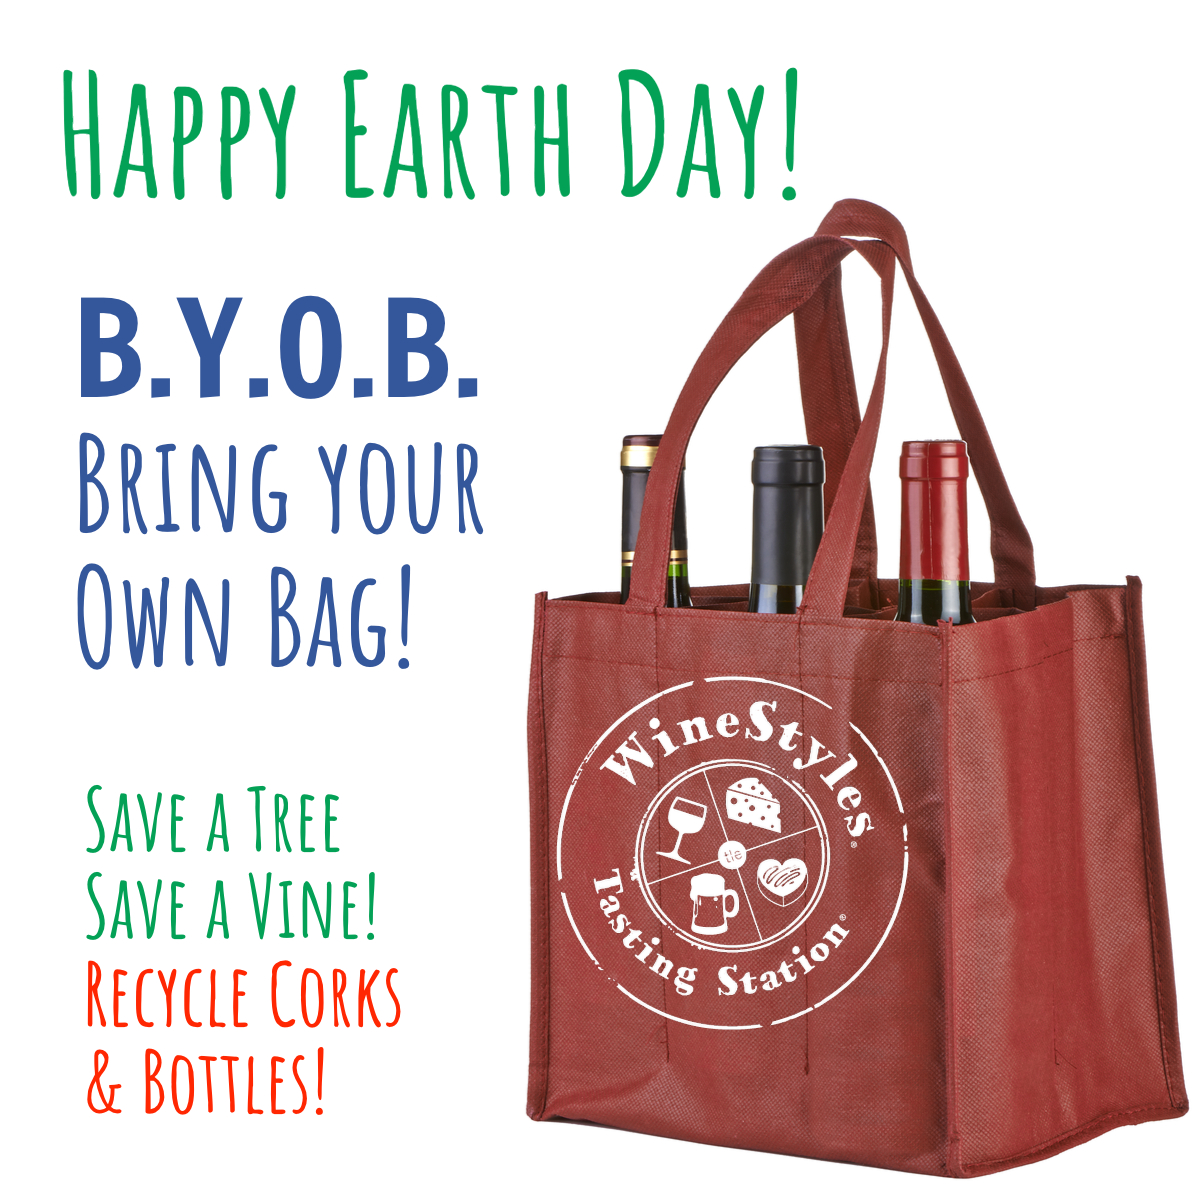 🌱 Sip sustainably this Earth Day! 🍷Grab a glass of SIP Certified Ancient Peaks wines! Because when you choose sustainability, every sip feels even better! #EarthDay #SustainableCheers #OrganicWines #SIPcertified #Recycle #UpCycle #EarthDay2024 @earthday